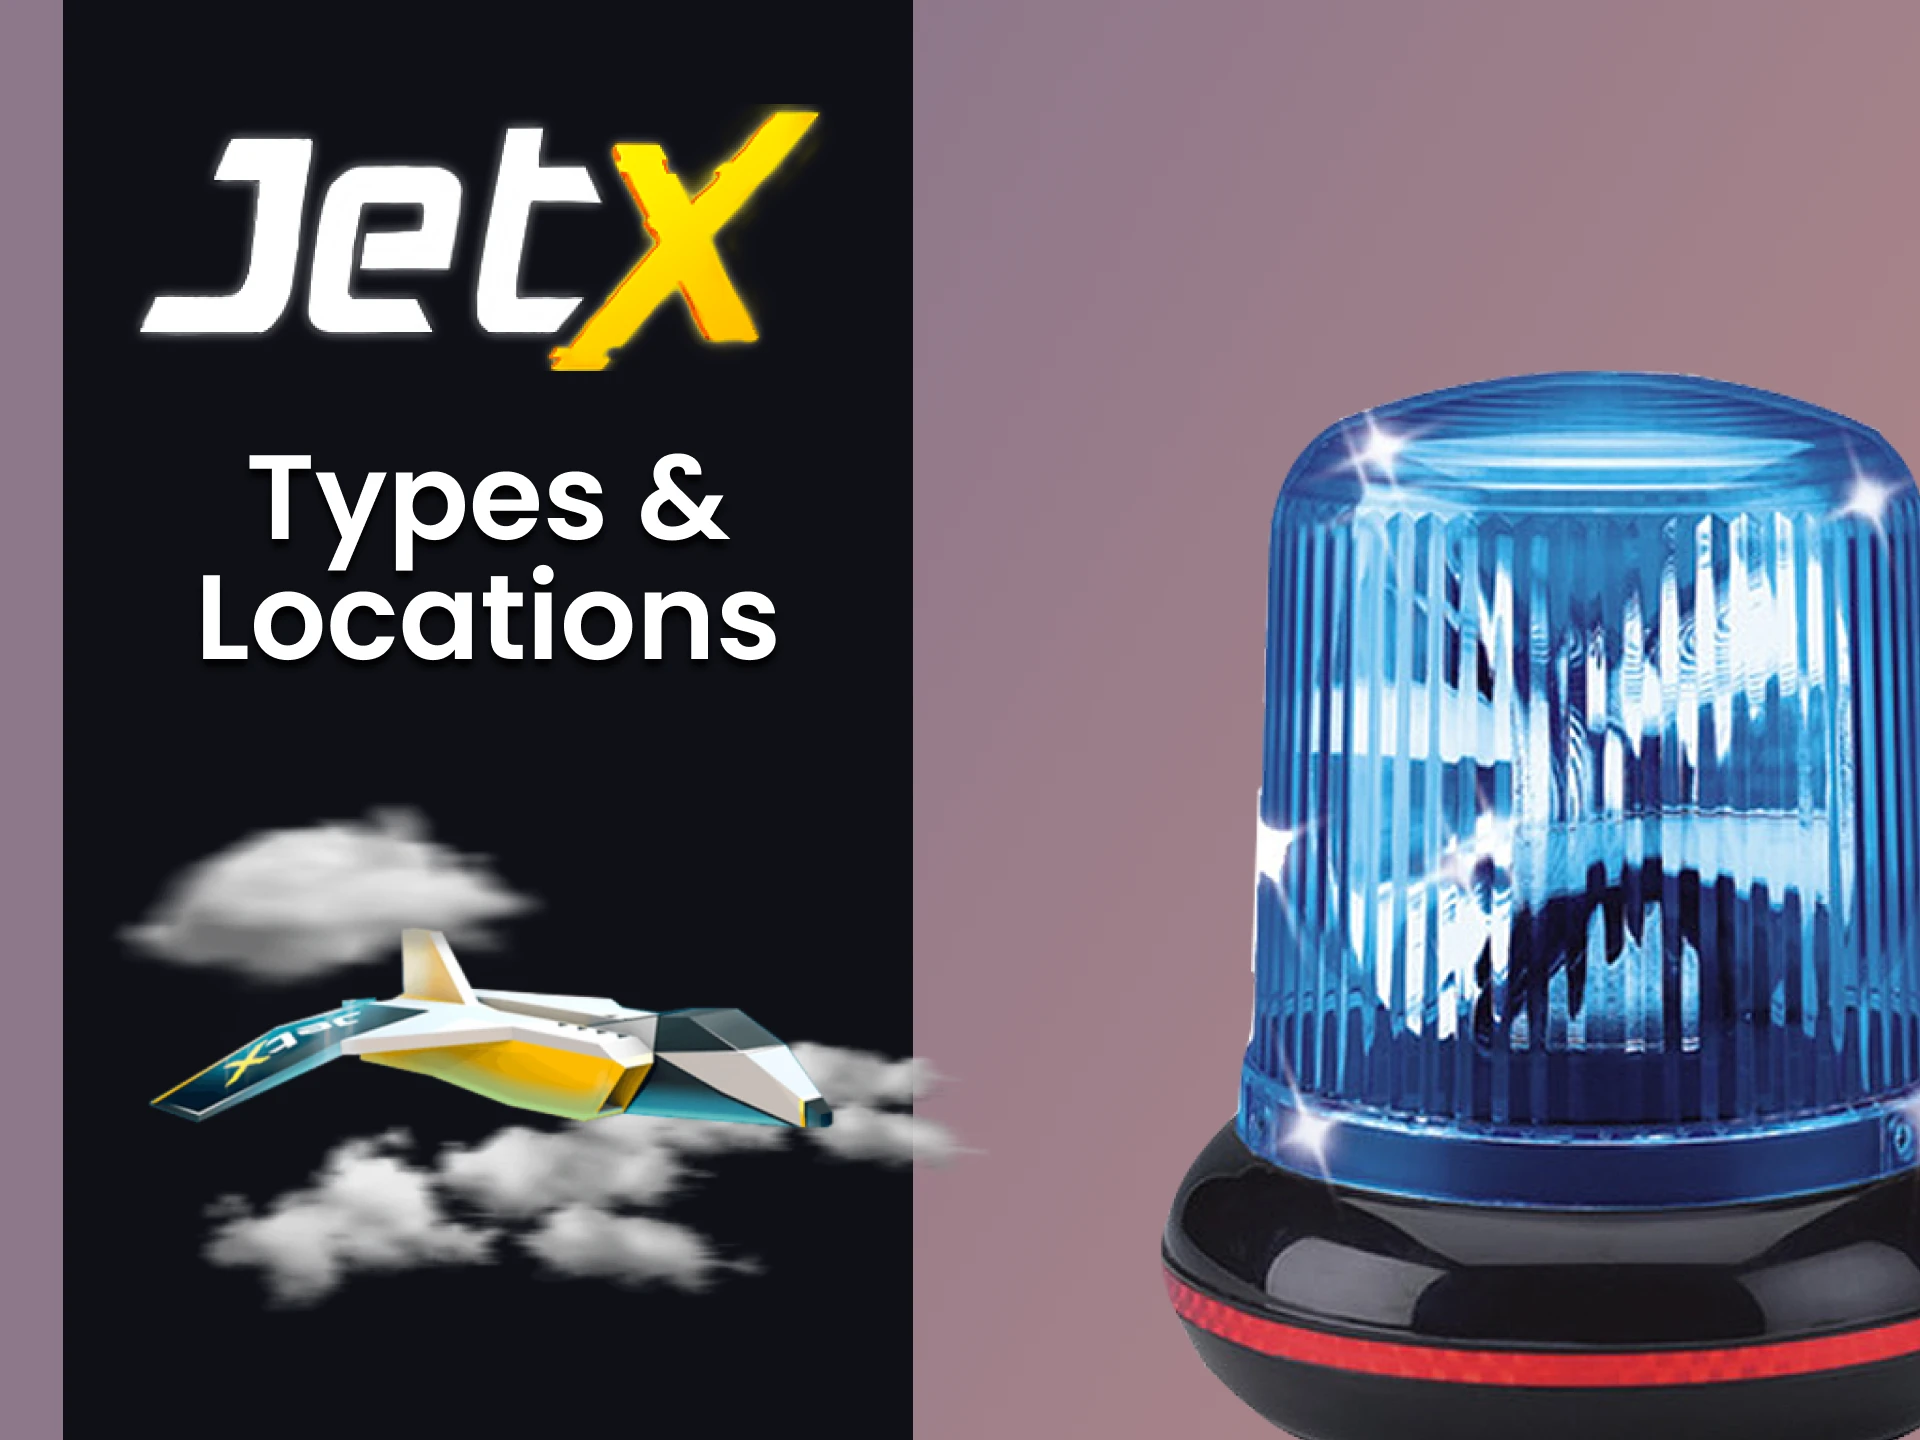 We will talk about the types of signals for JetX.